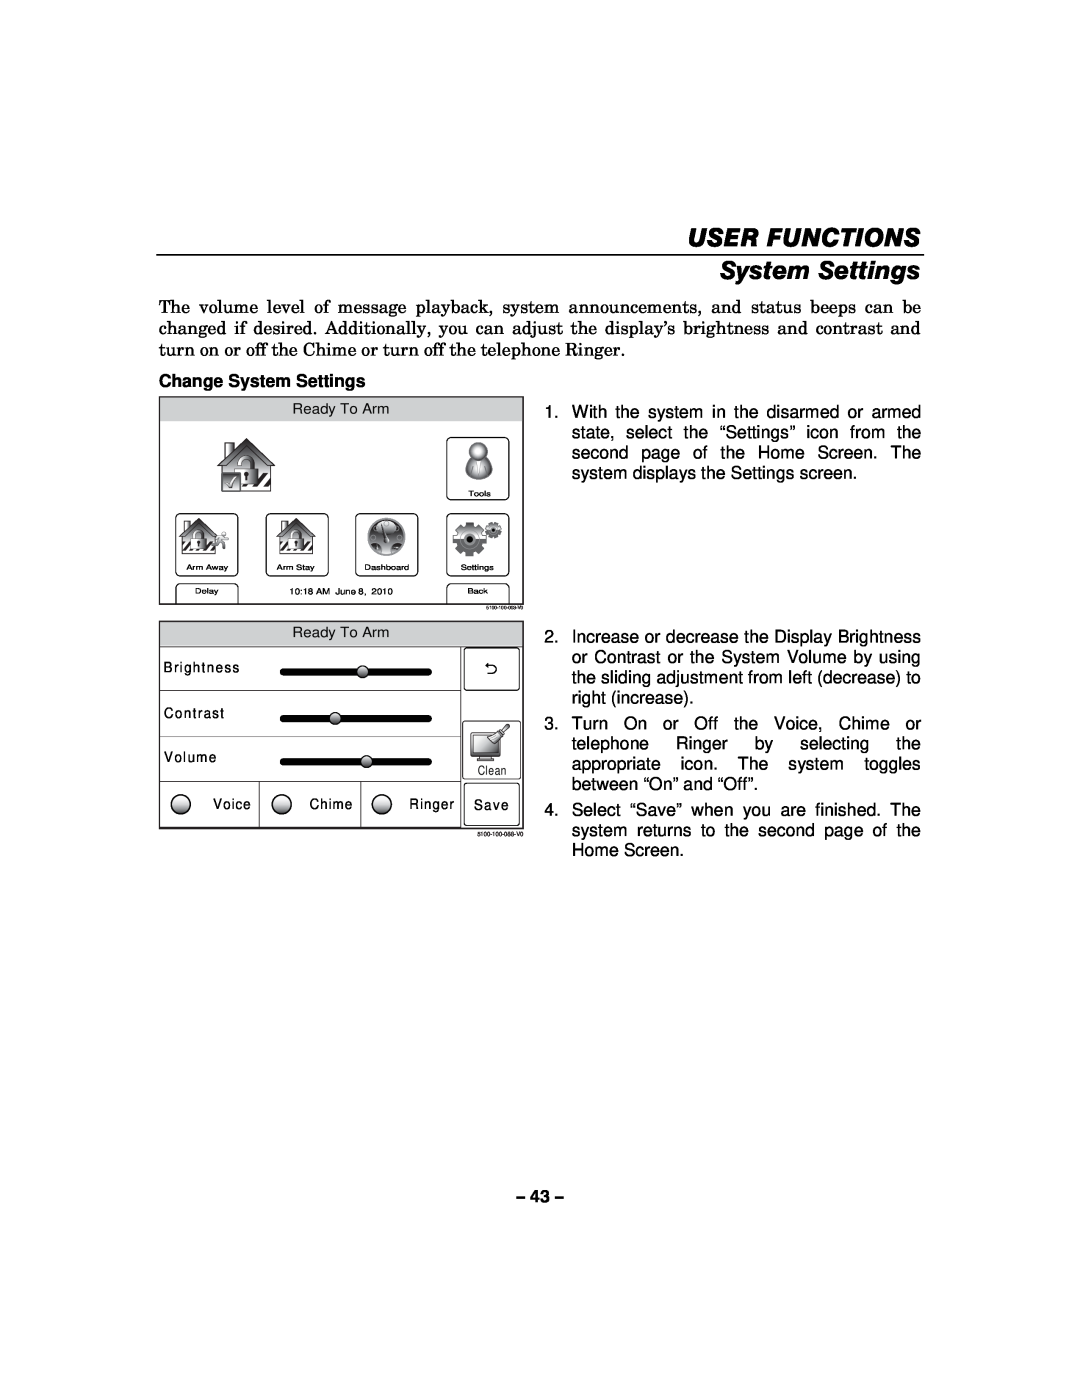 Honeywell L5100 manual USER FUNCTIONS System Settings, Change System Settings 